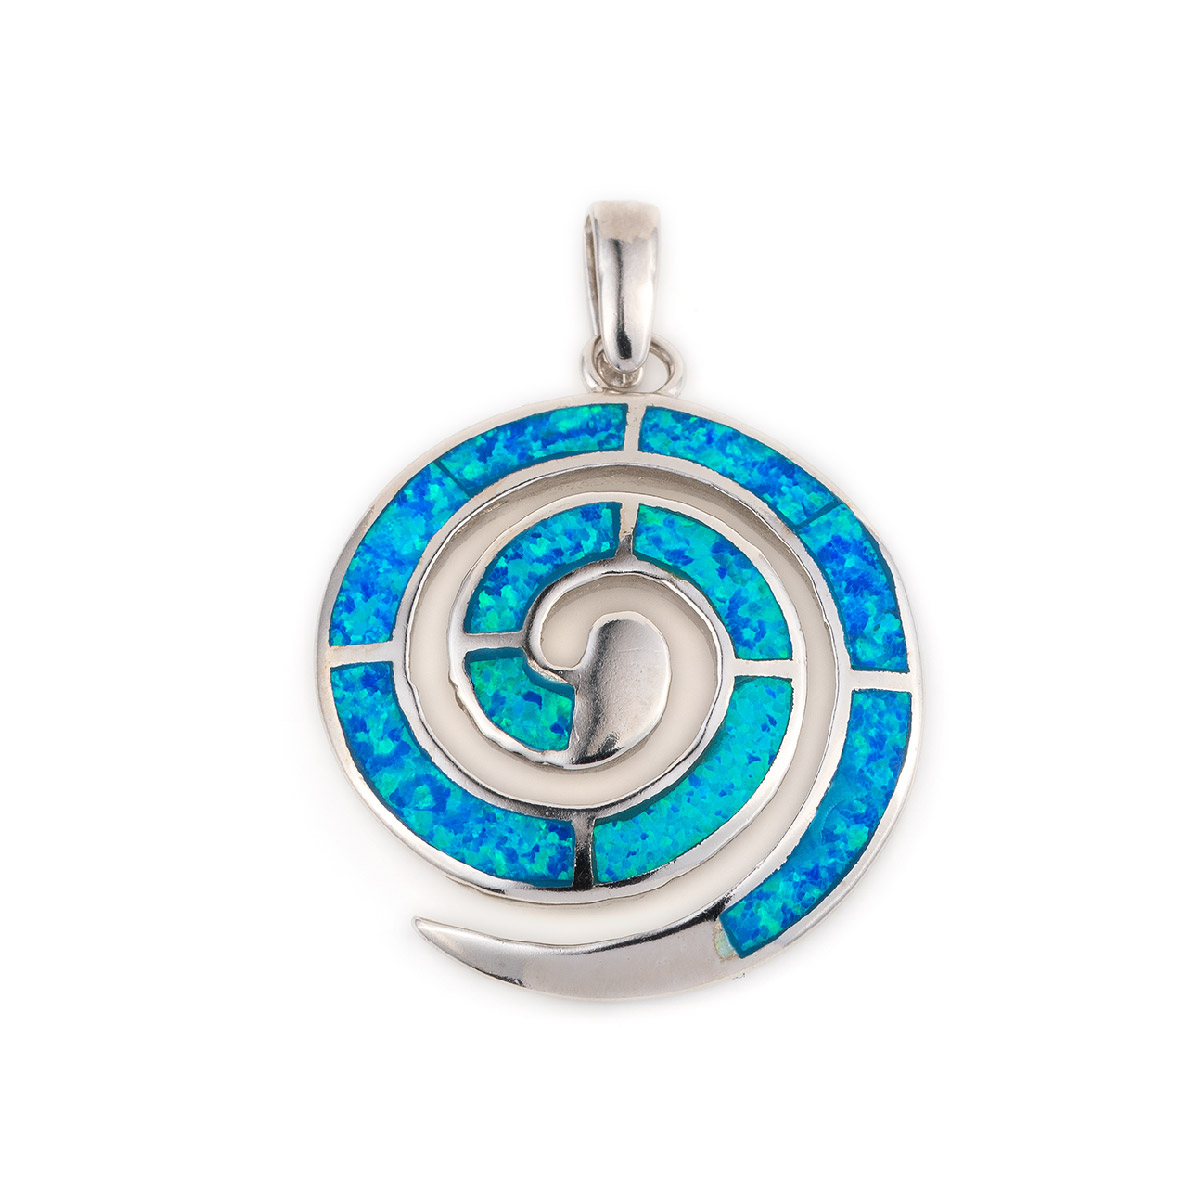 Details about   AMAZING STERLING SILVER BLUE OPAL WAVE IN CIRCLE PENDANT